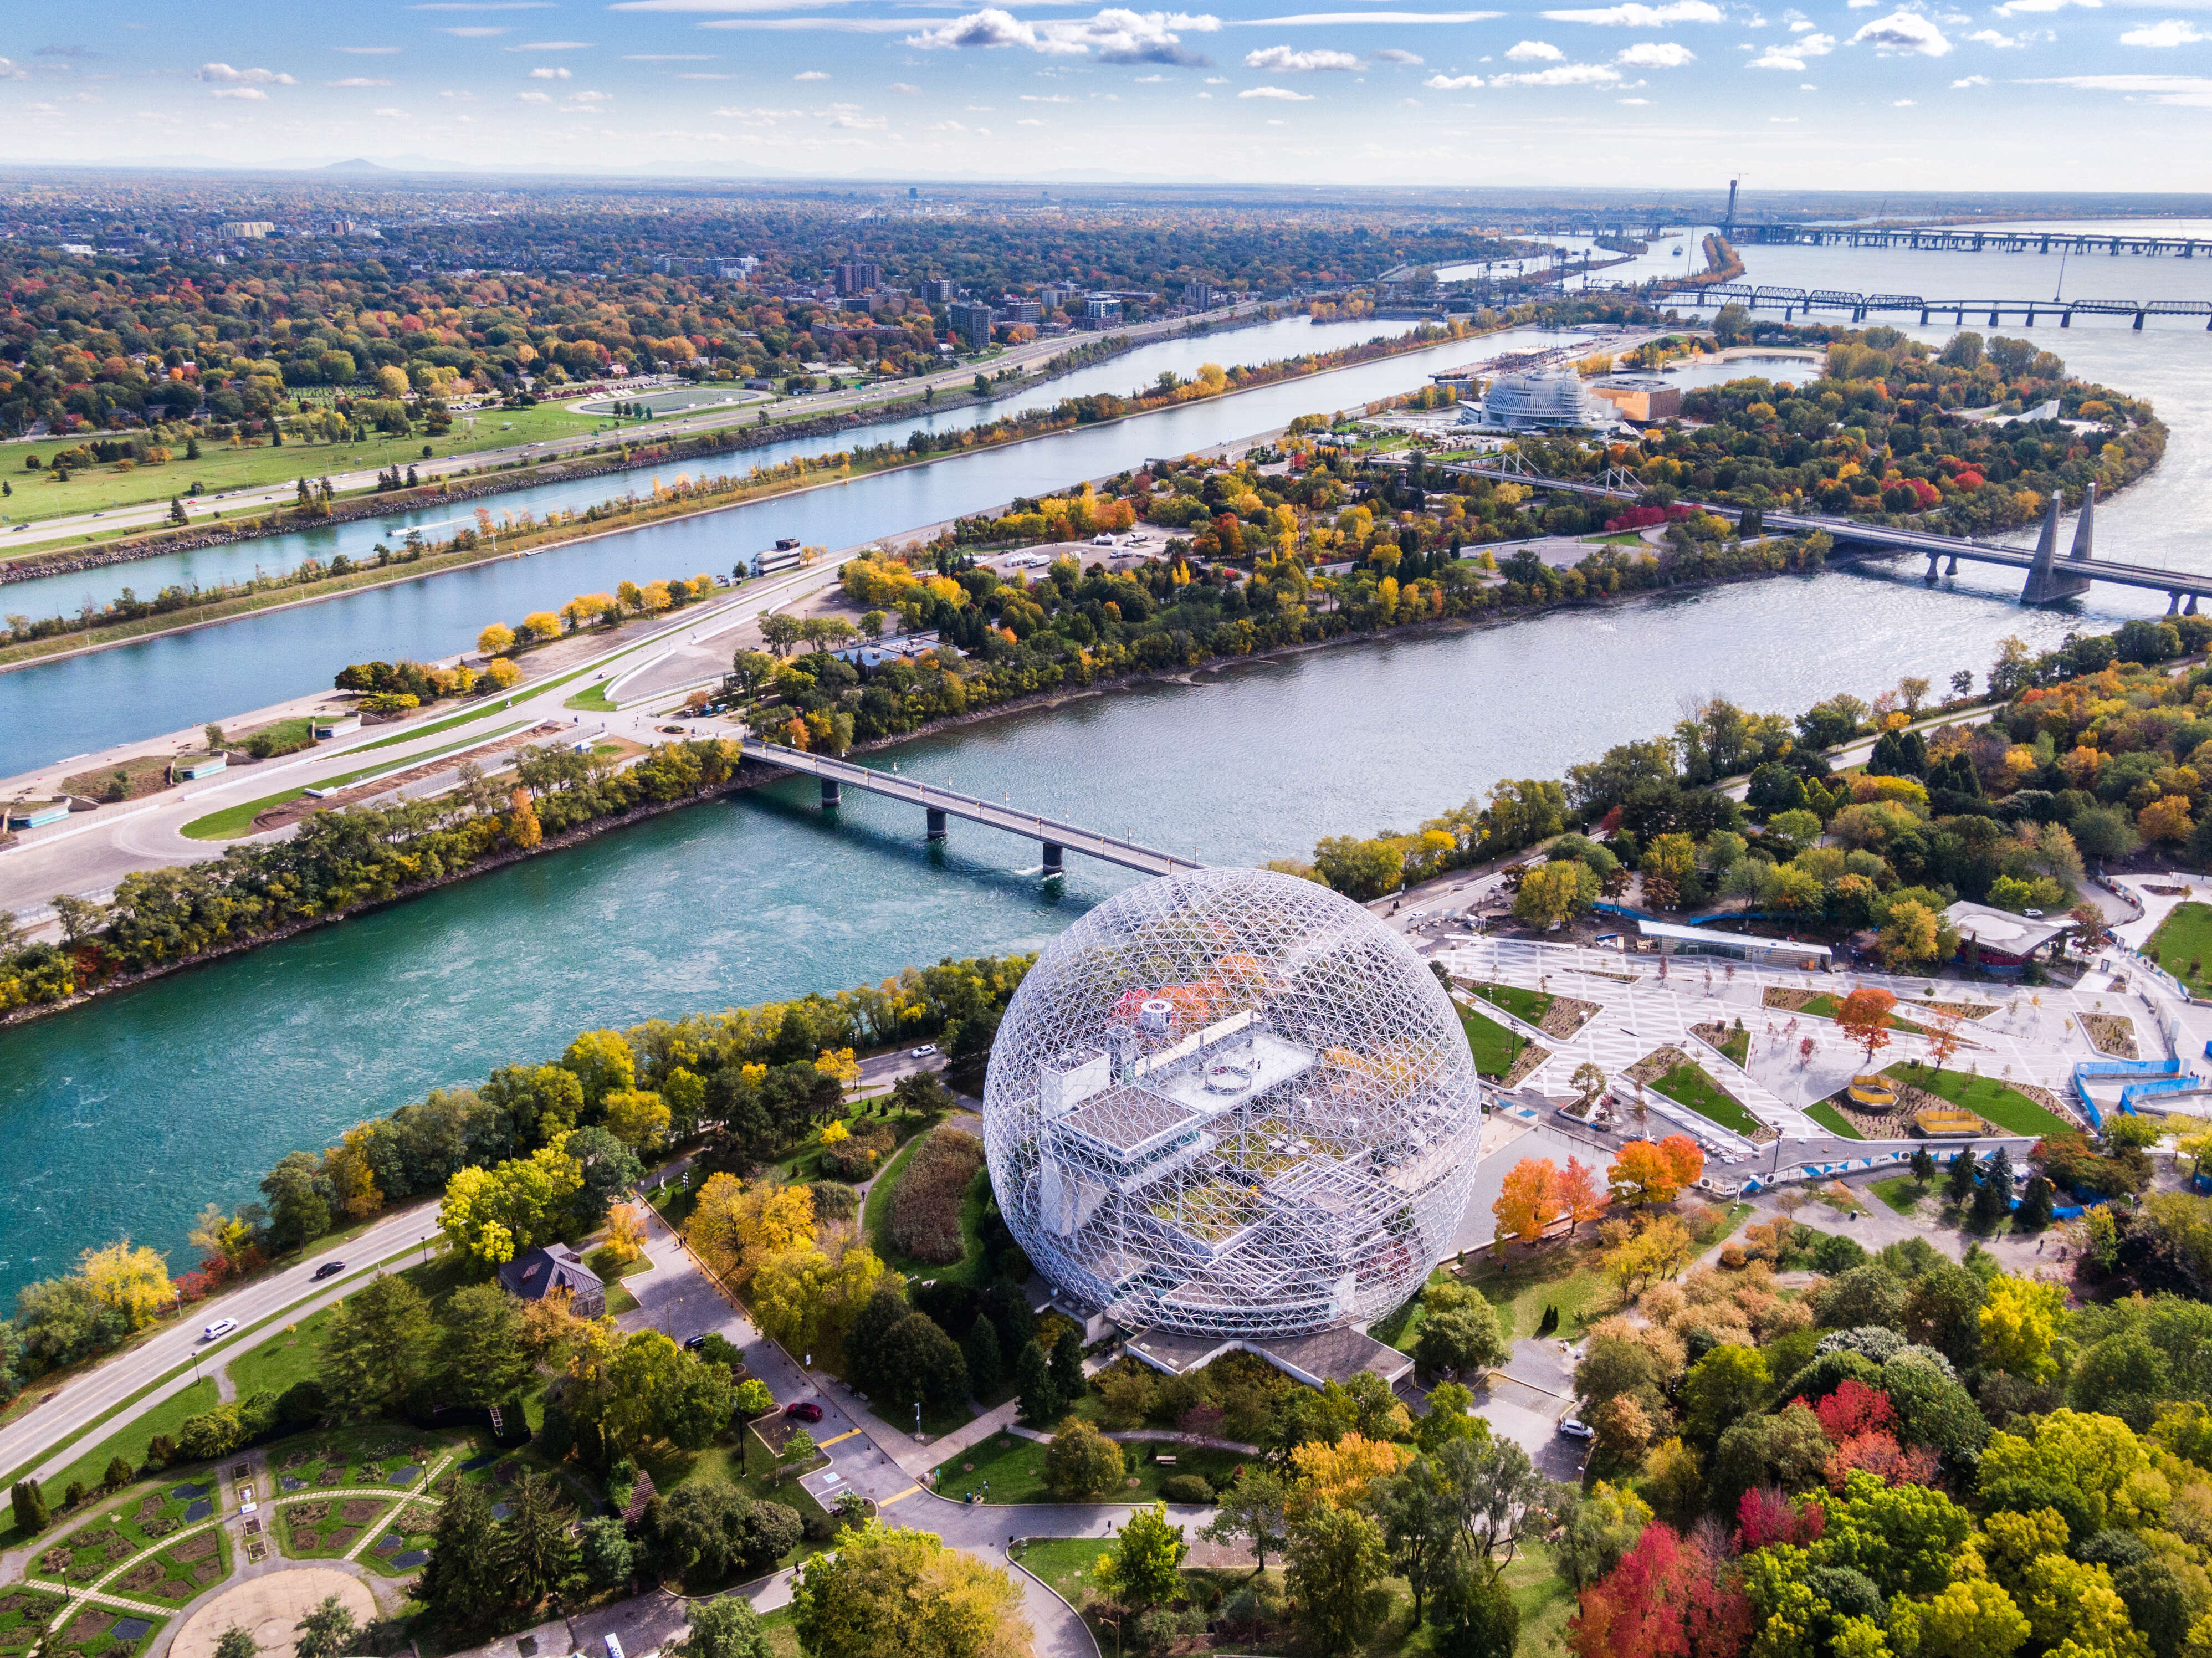 buildings and a large circular structure on a riverbank in fall